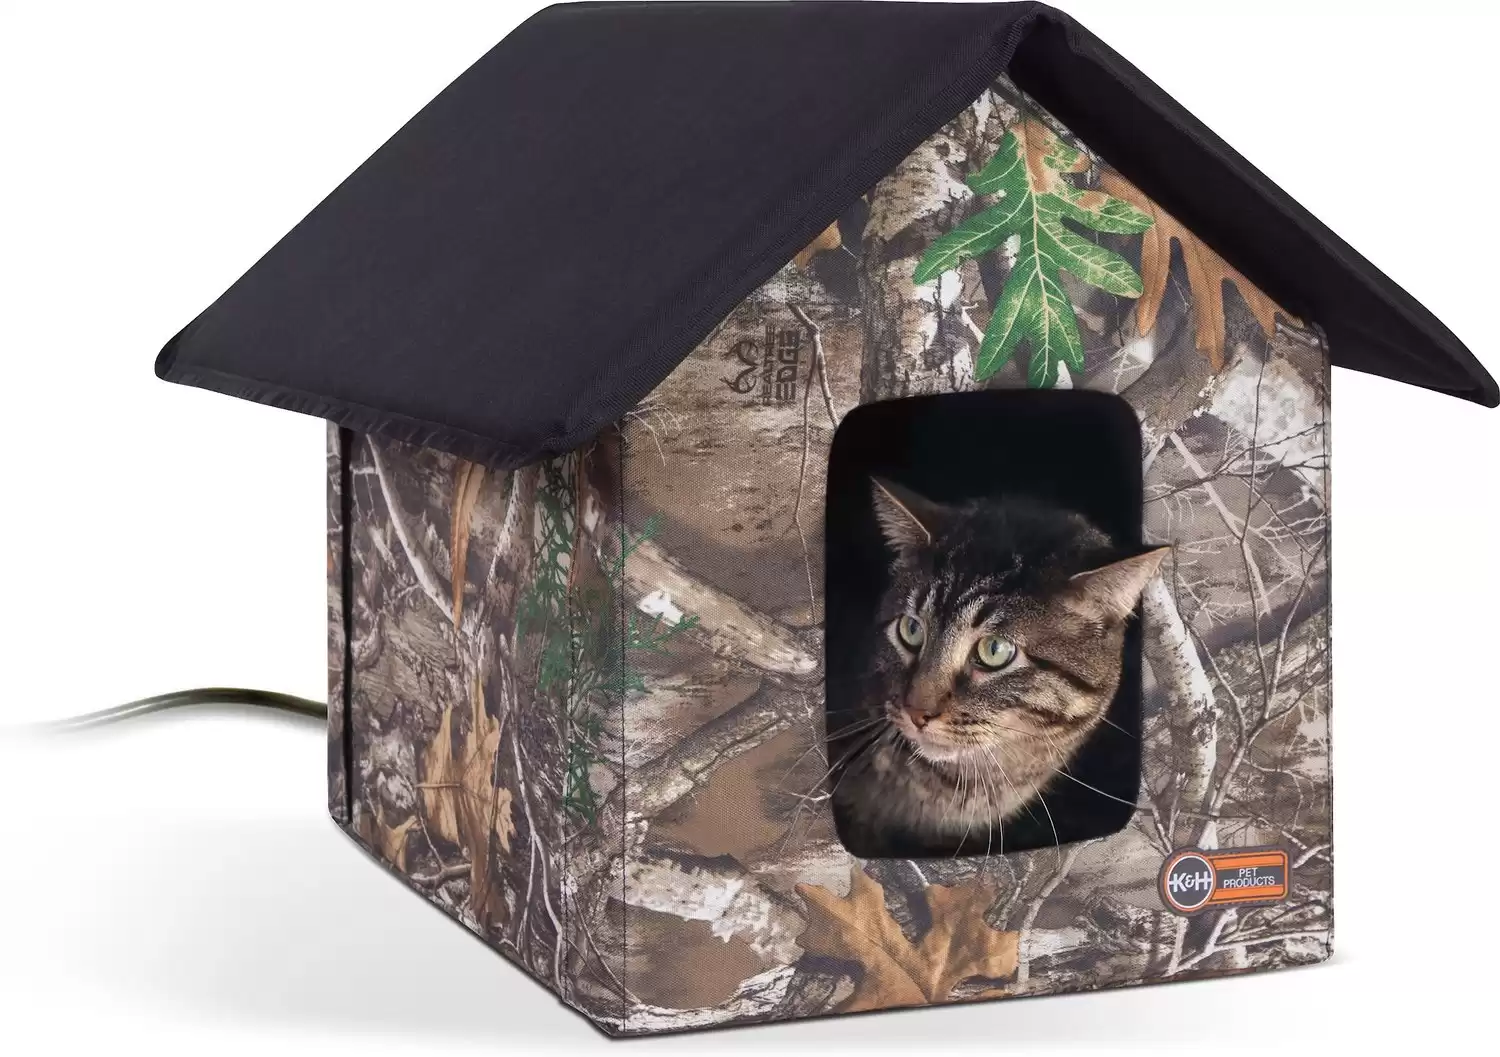 K&H Pet Products Heated Shelter